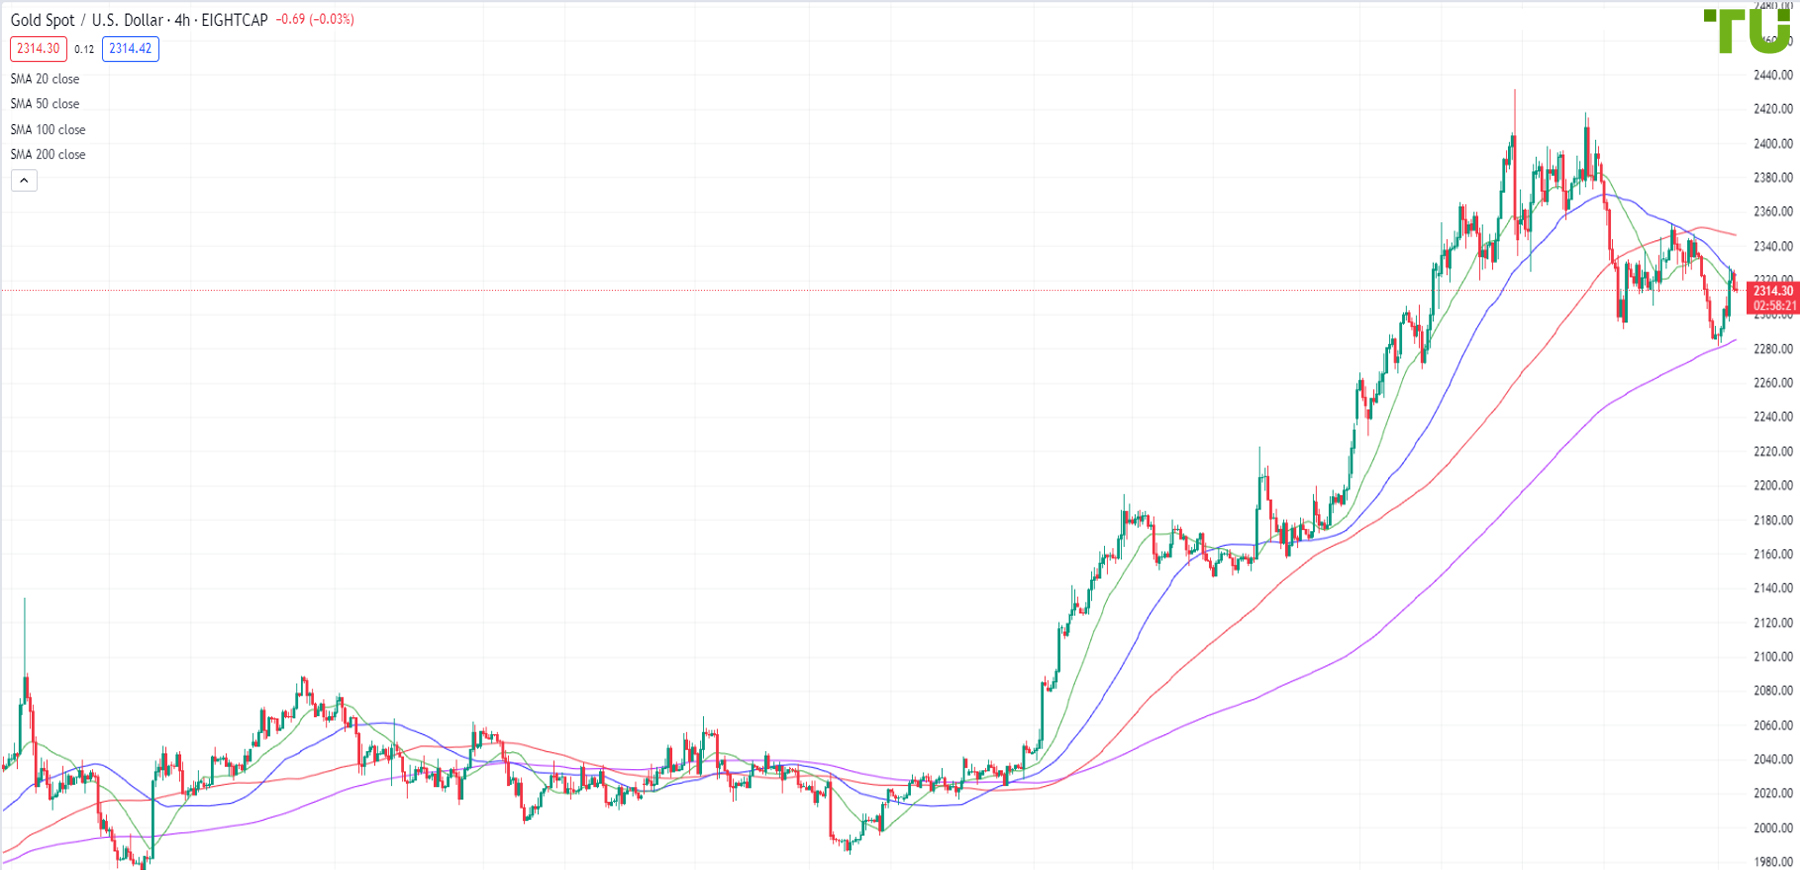 XAU/USD is under pressure after recovery